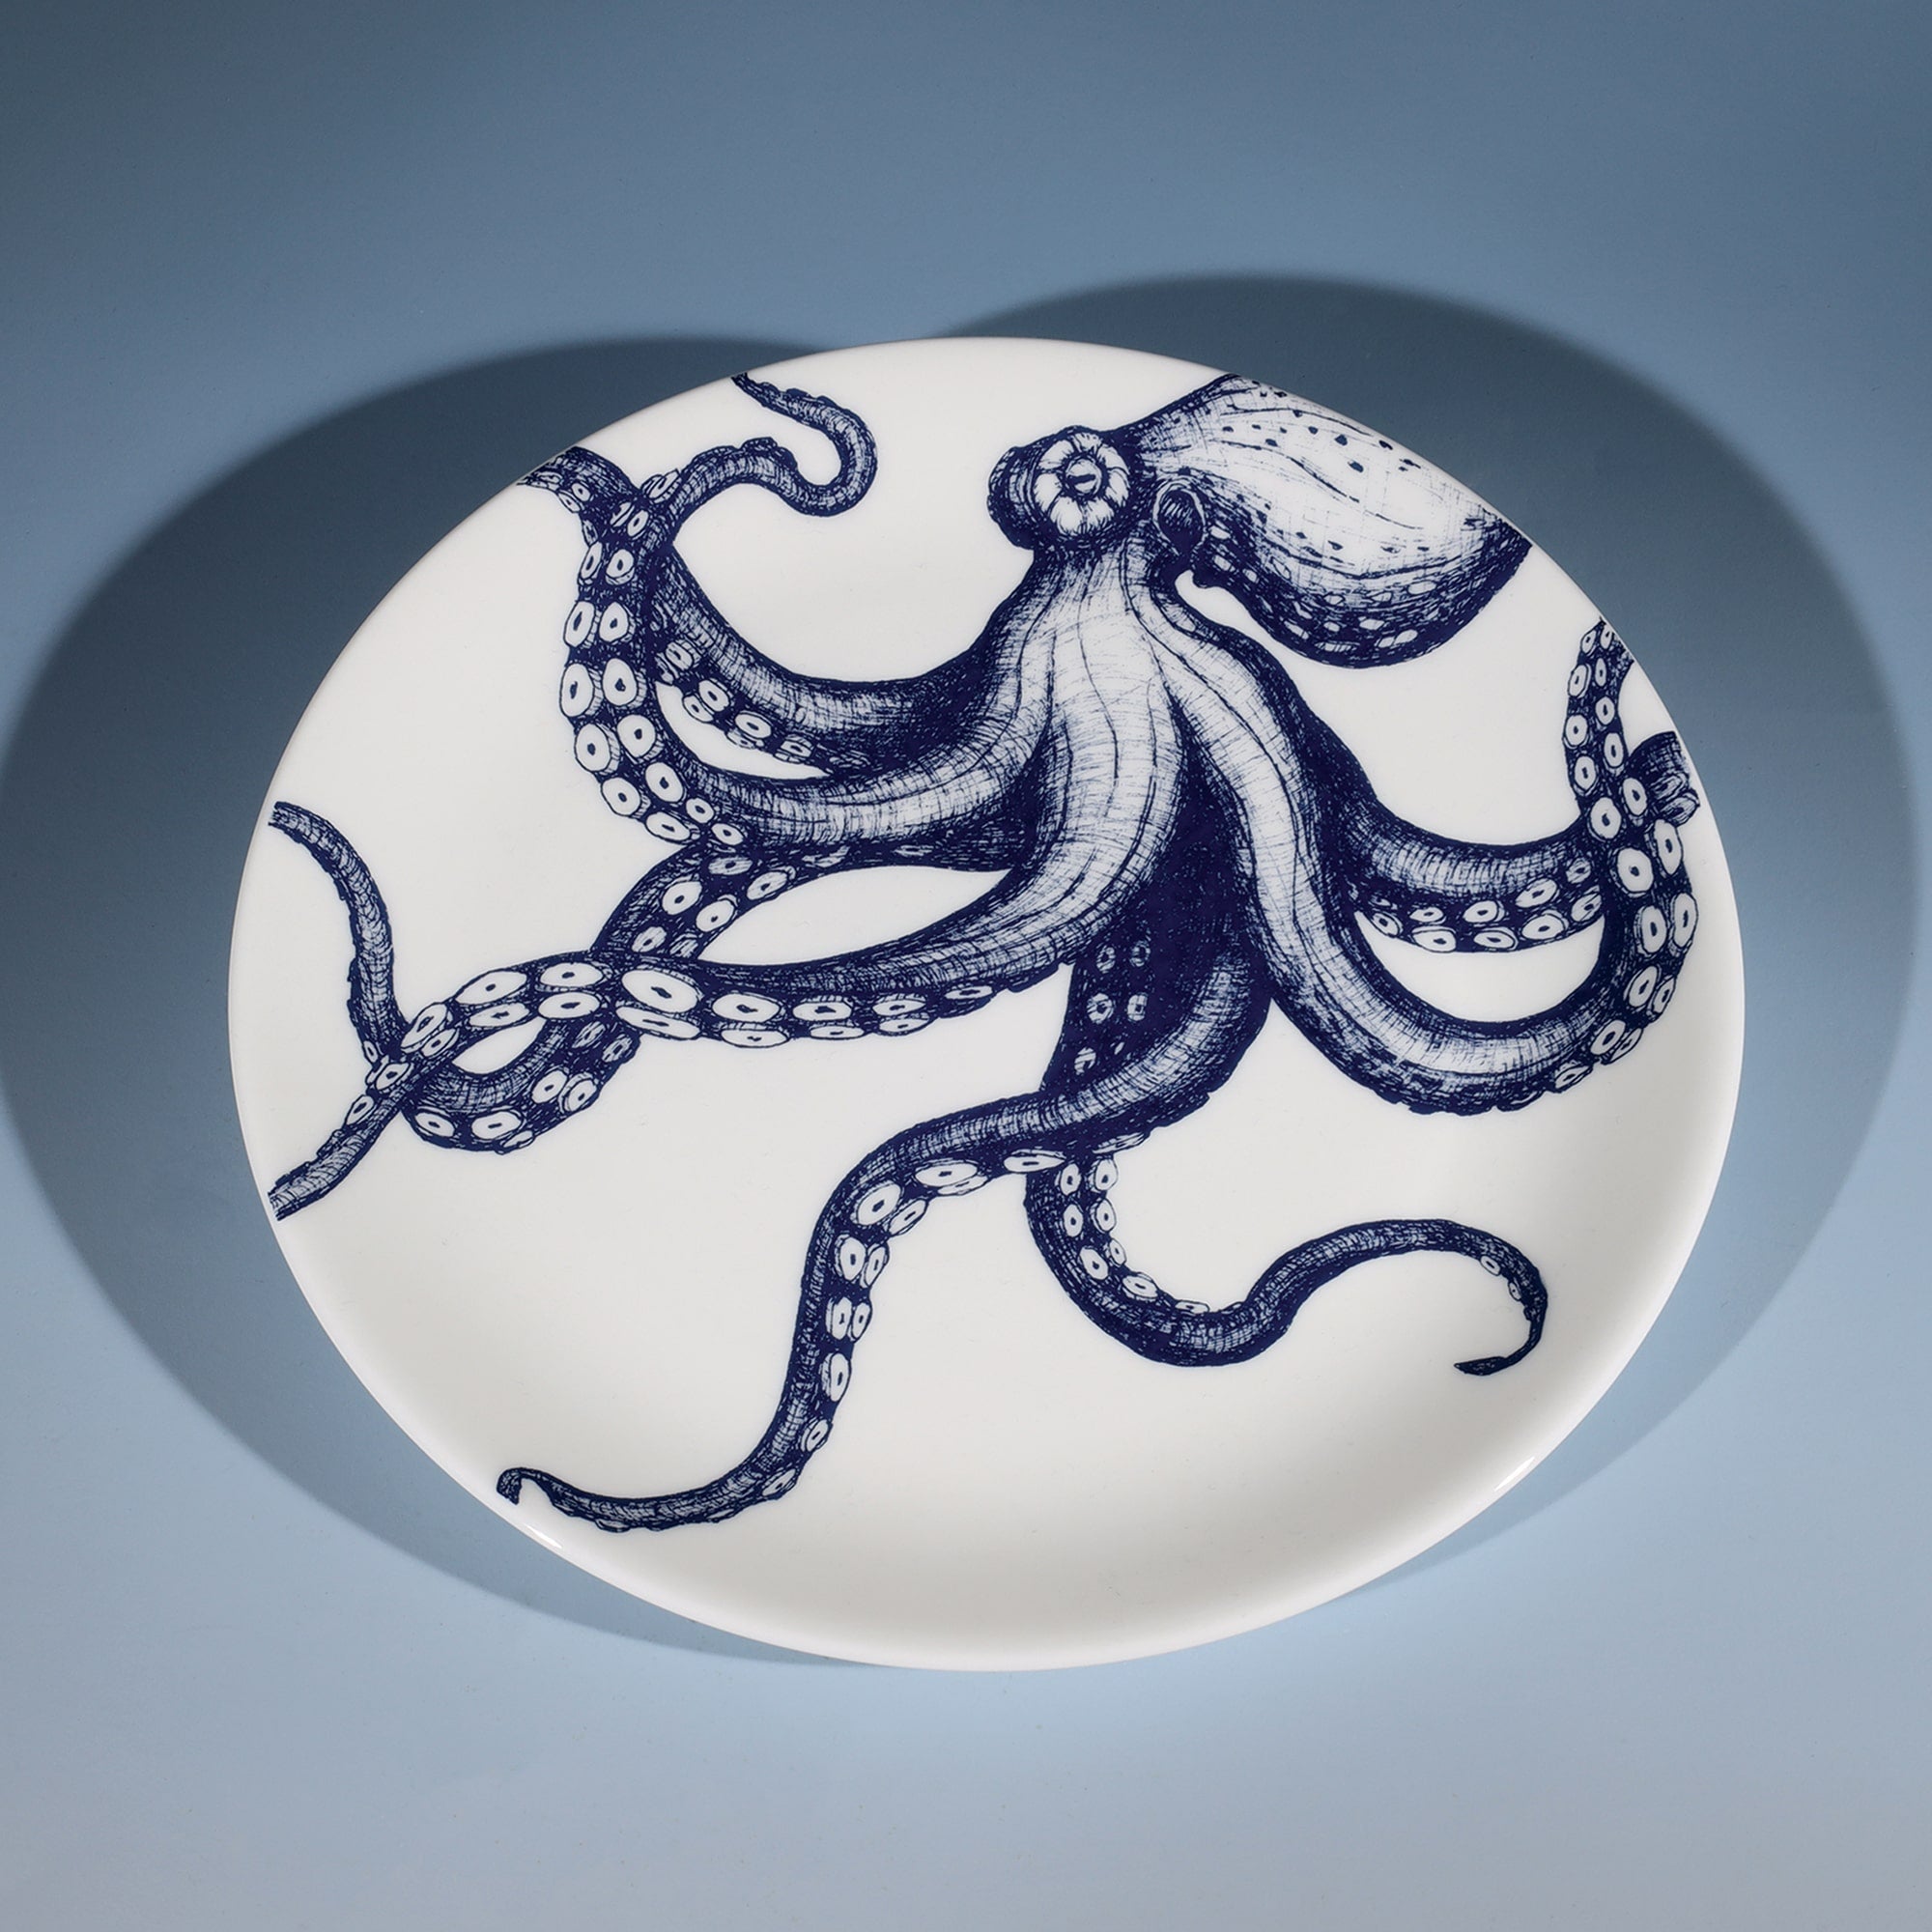  Bone China White plate with hand drawn illustration our classic Octopus in Navy